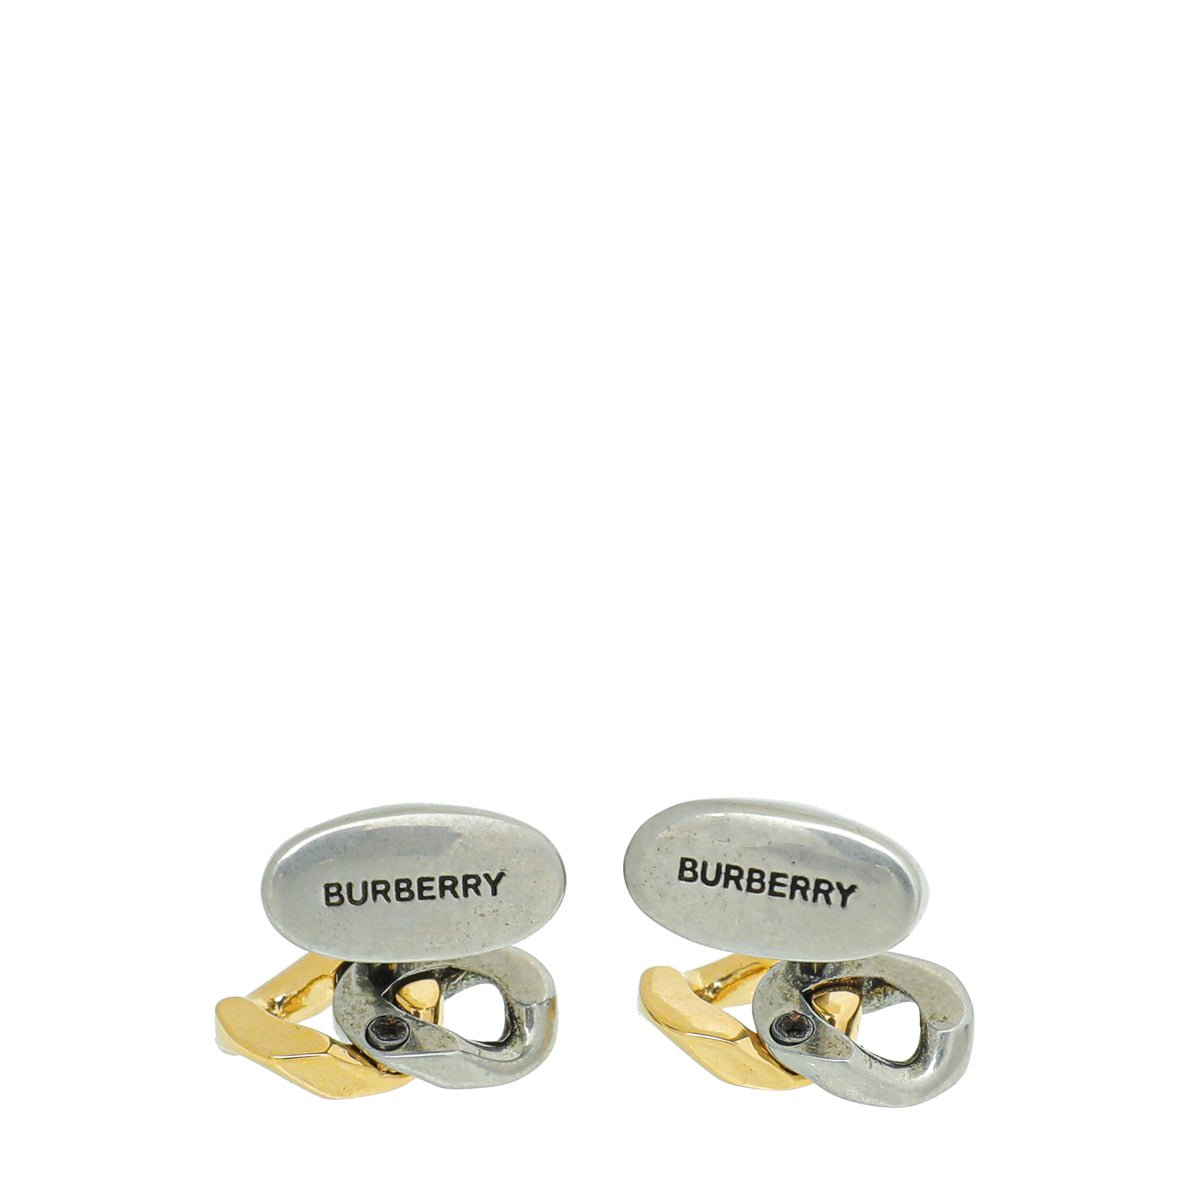 Burberry - Burberry Bicolor Chain Link Cuff Links | The Closet